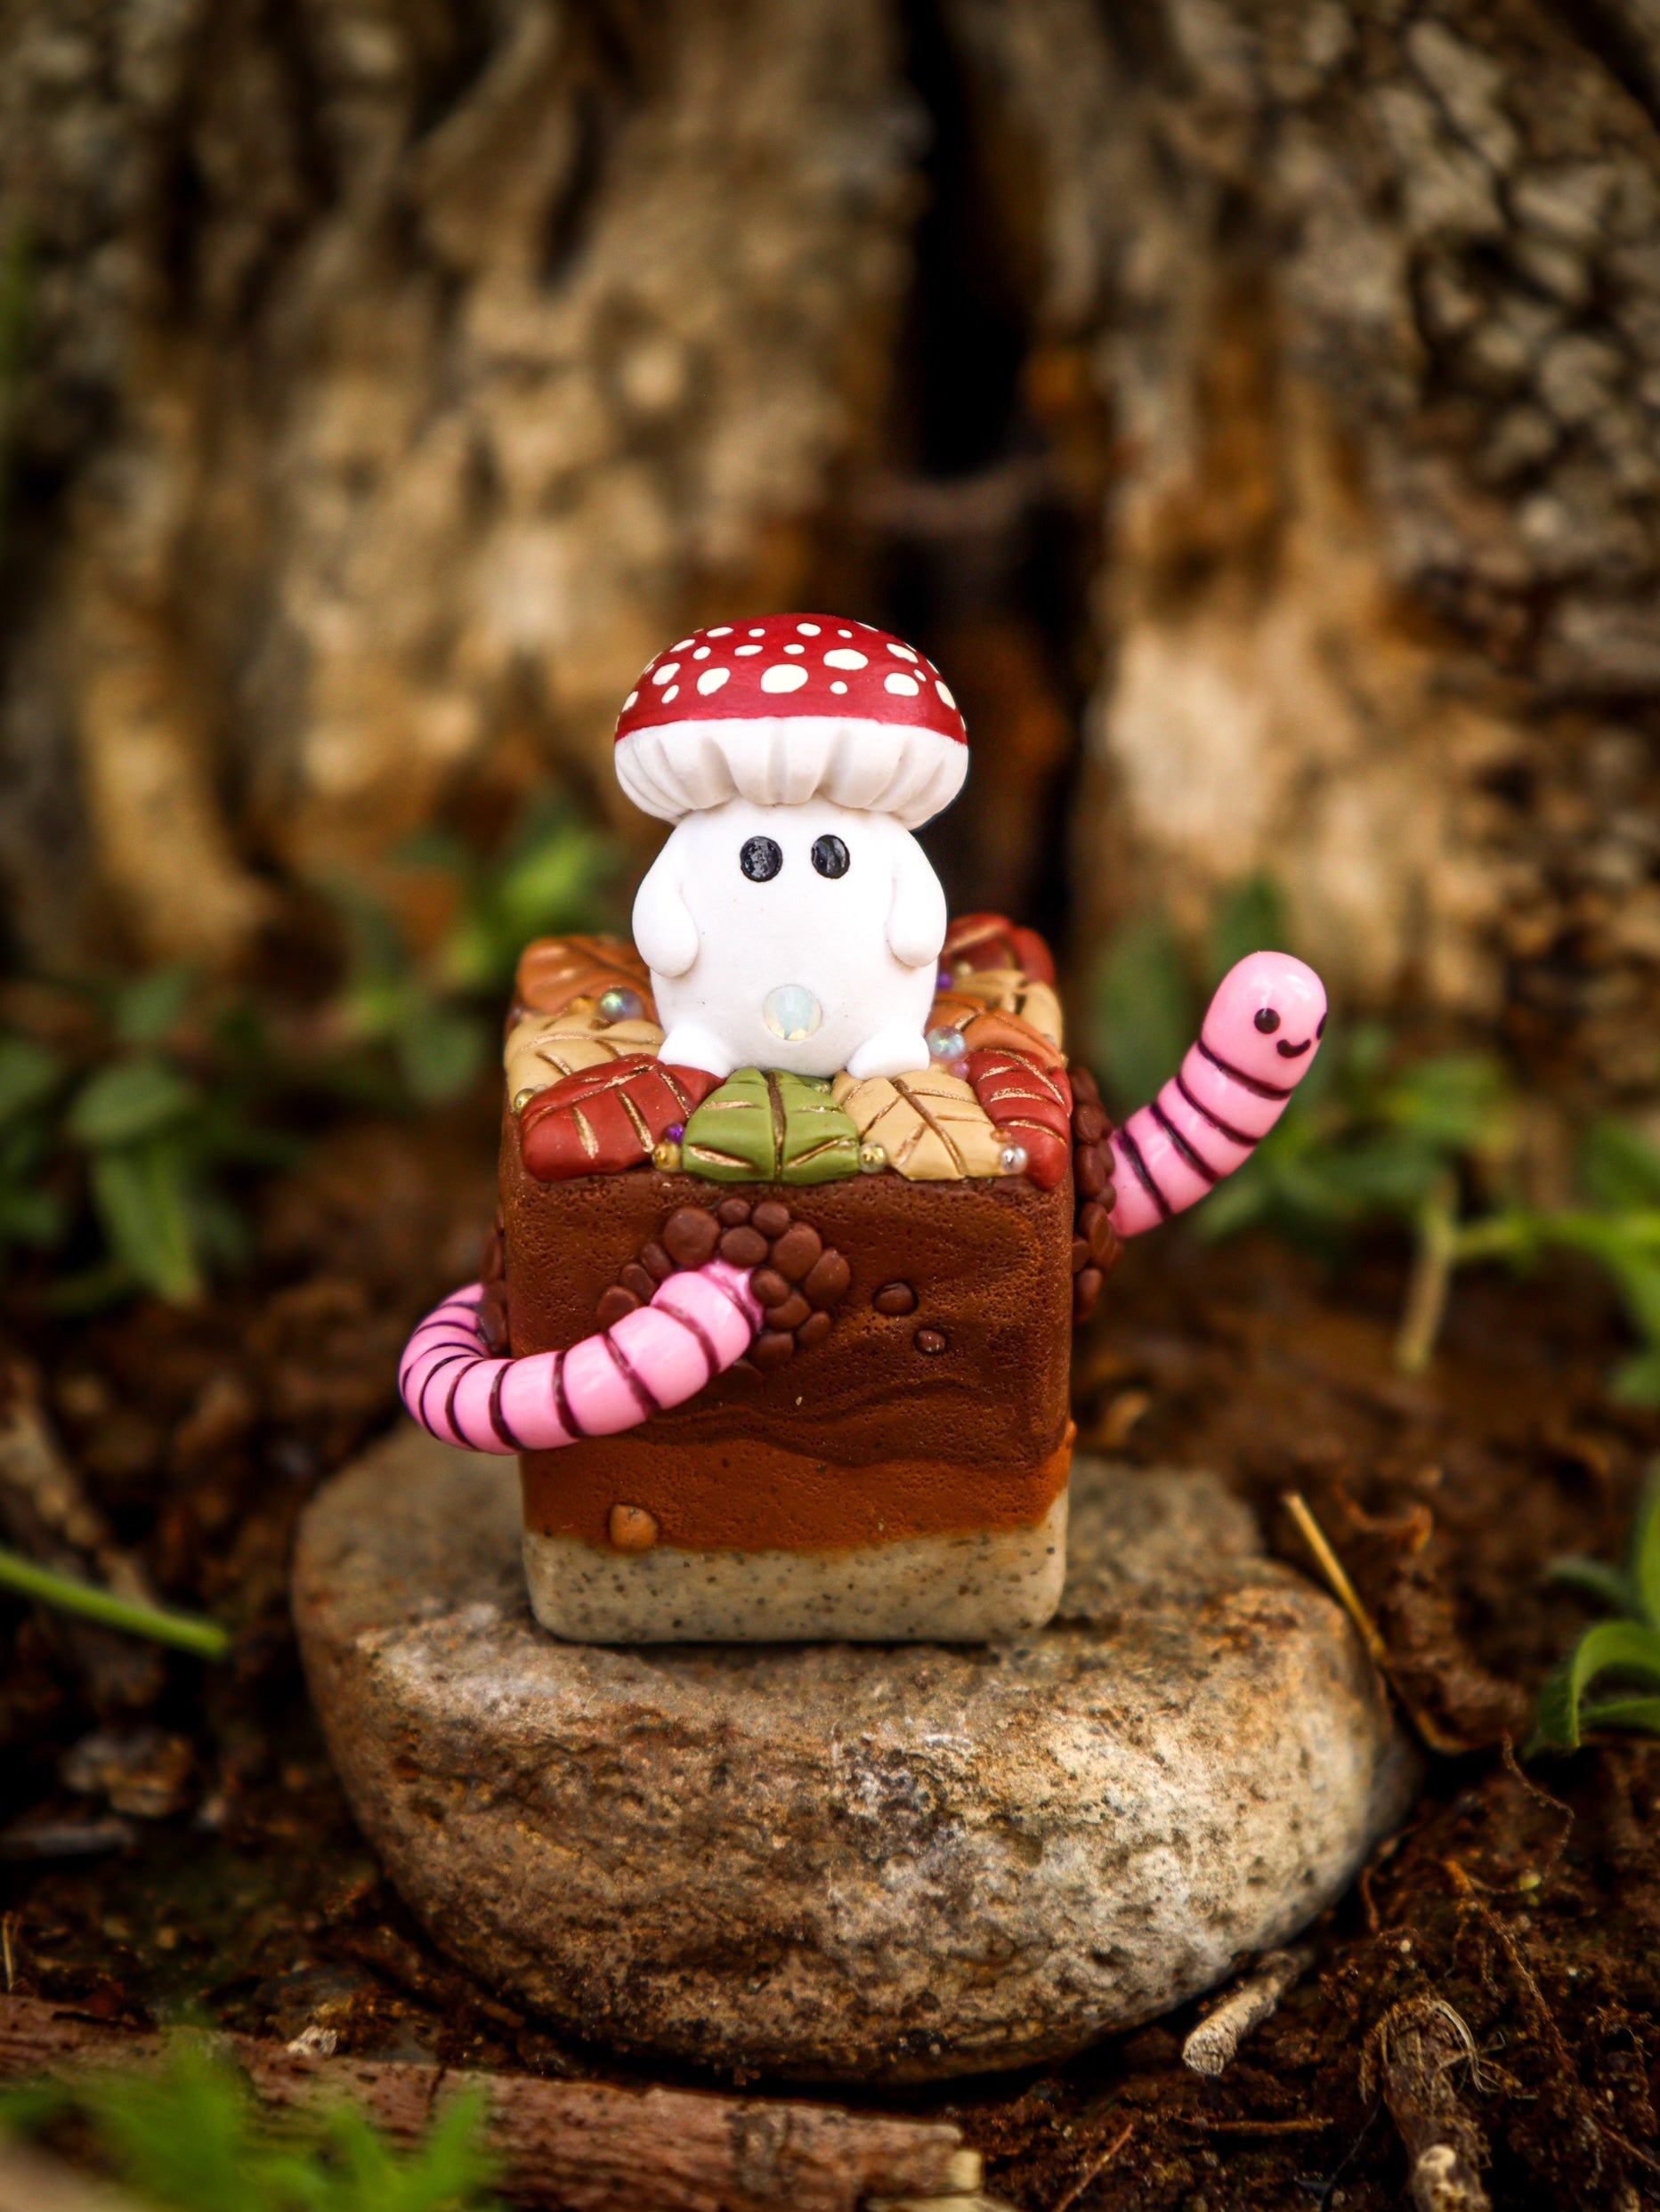 A blind box toy named Little Shit Big Deal - CUBES by Fairies And Fancies, featuring a small toy with a mushroom on a square object, a stone, a mushroom, and a pink worm.